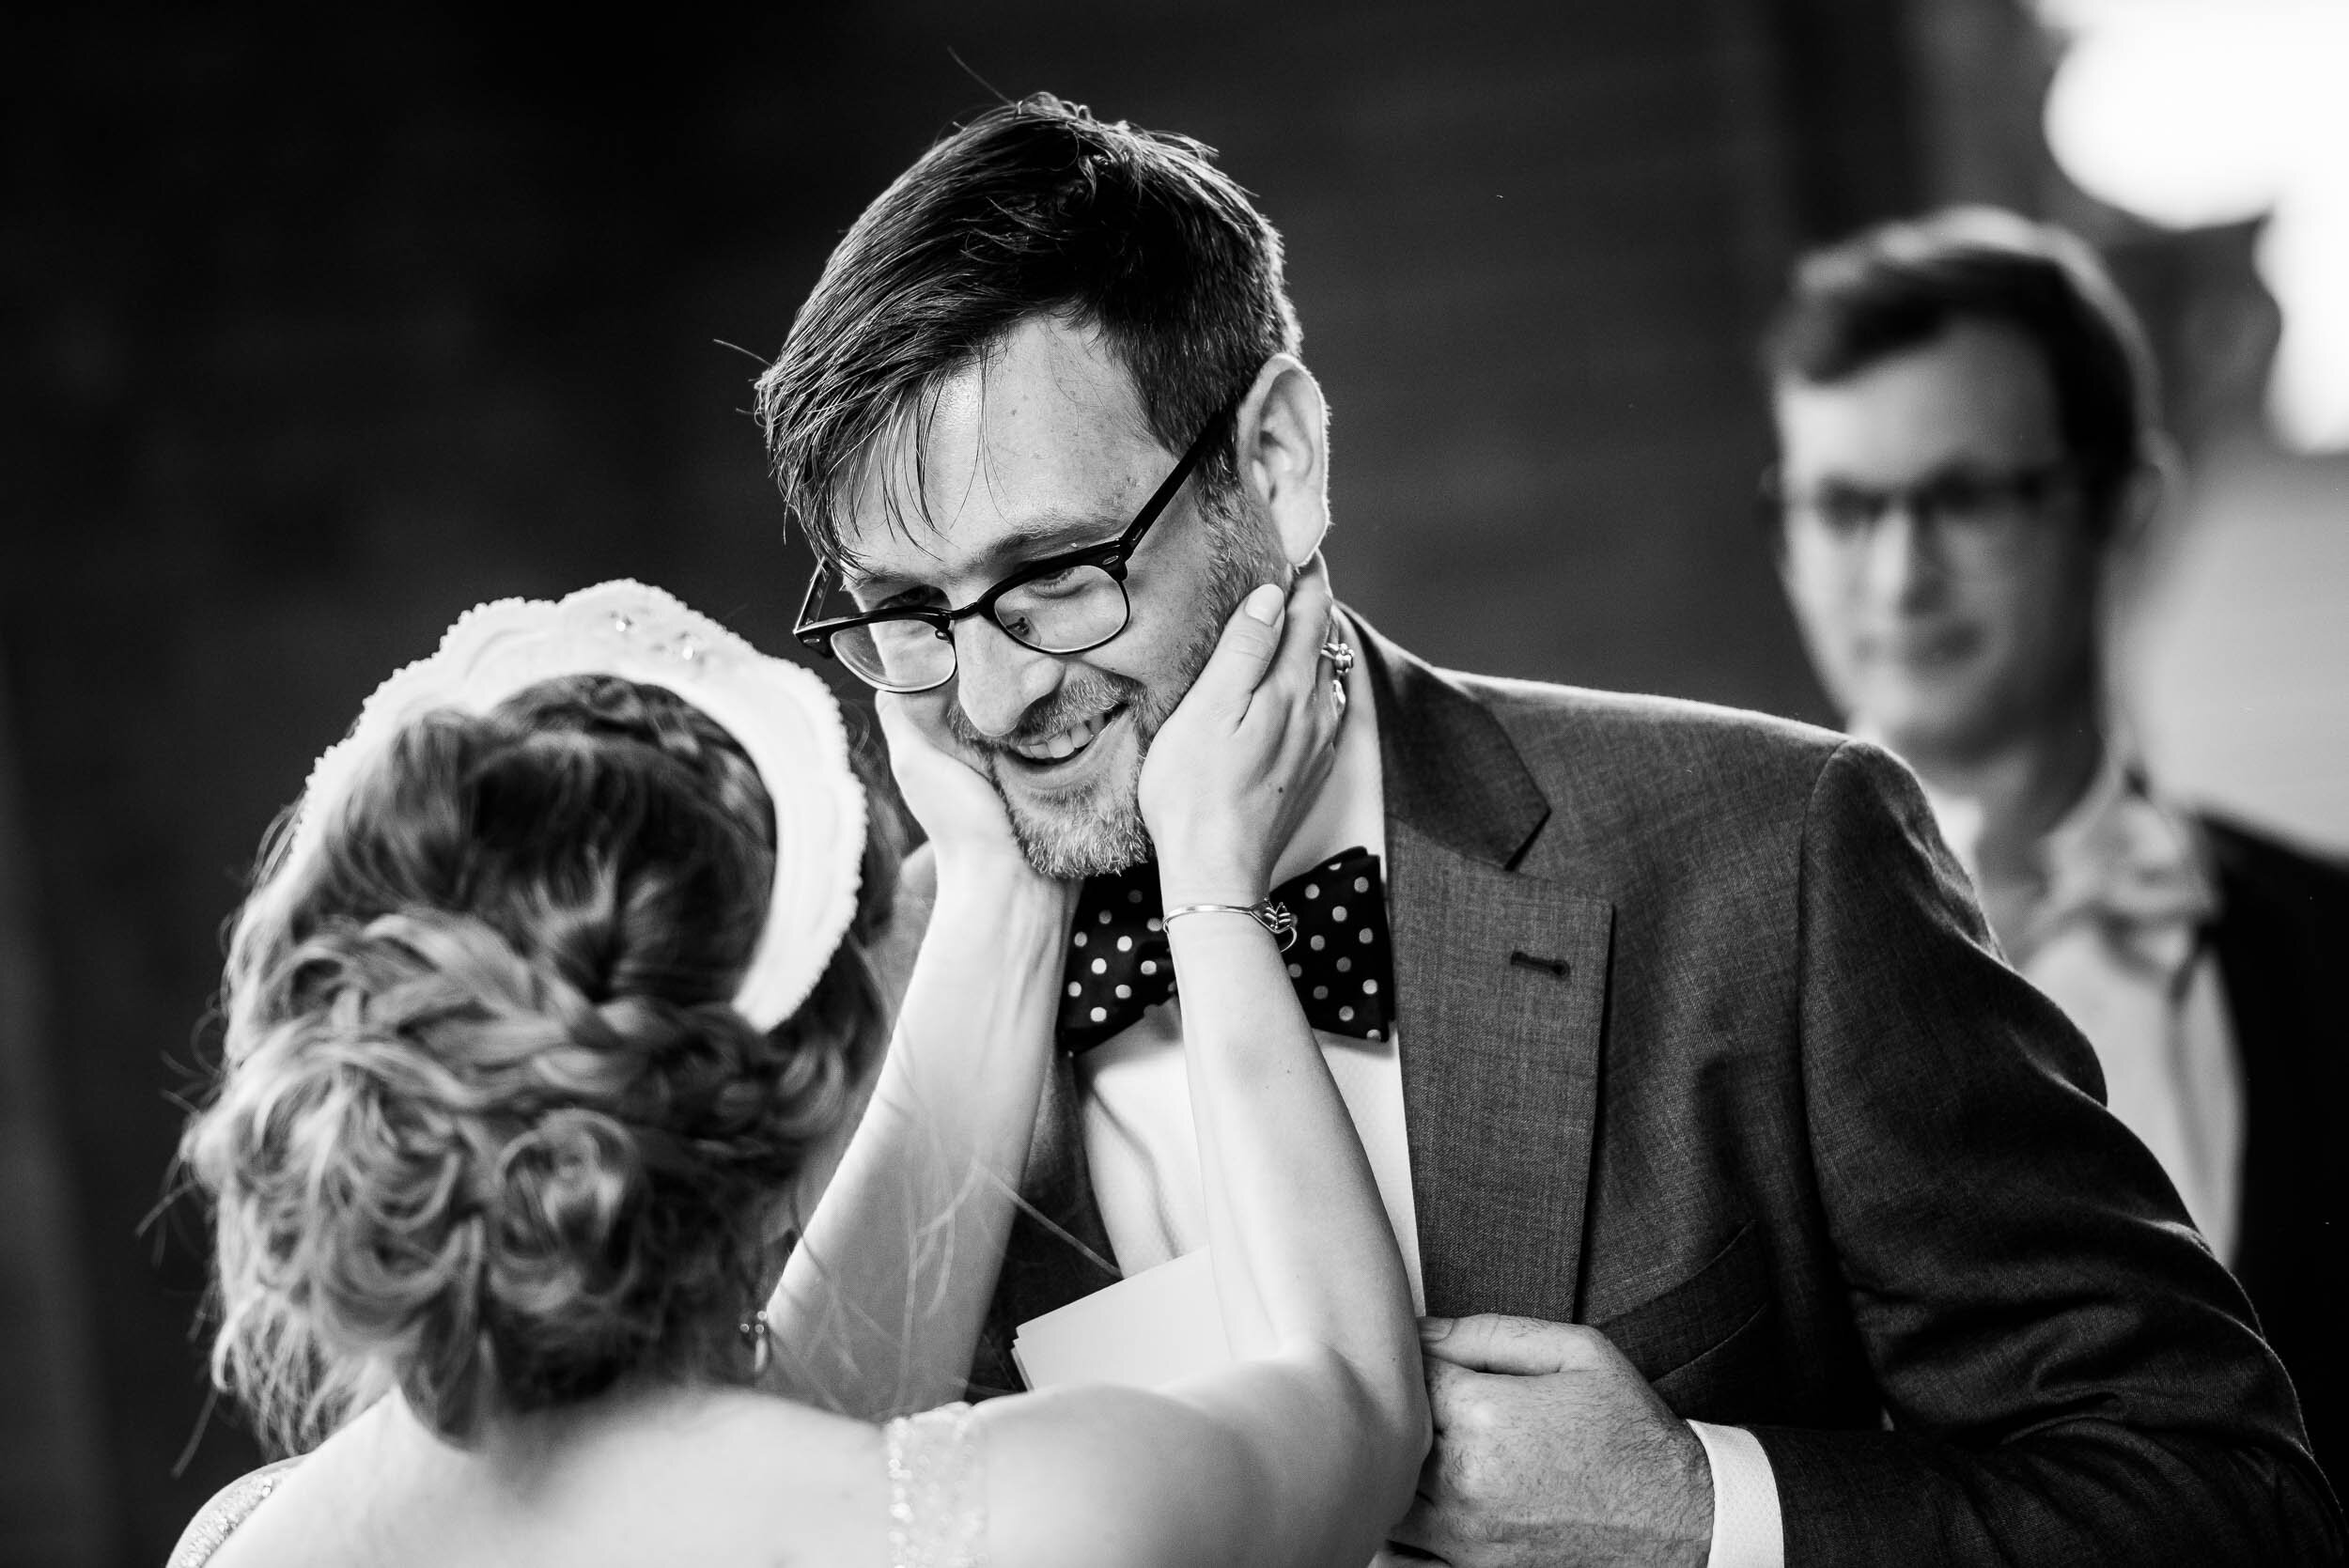 Emotional moment between groom and bride during their wedding ceremony: Columbus Park Refectory Chicago wedding captured by J. Brown Photography.